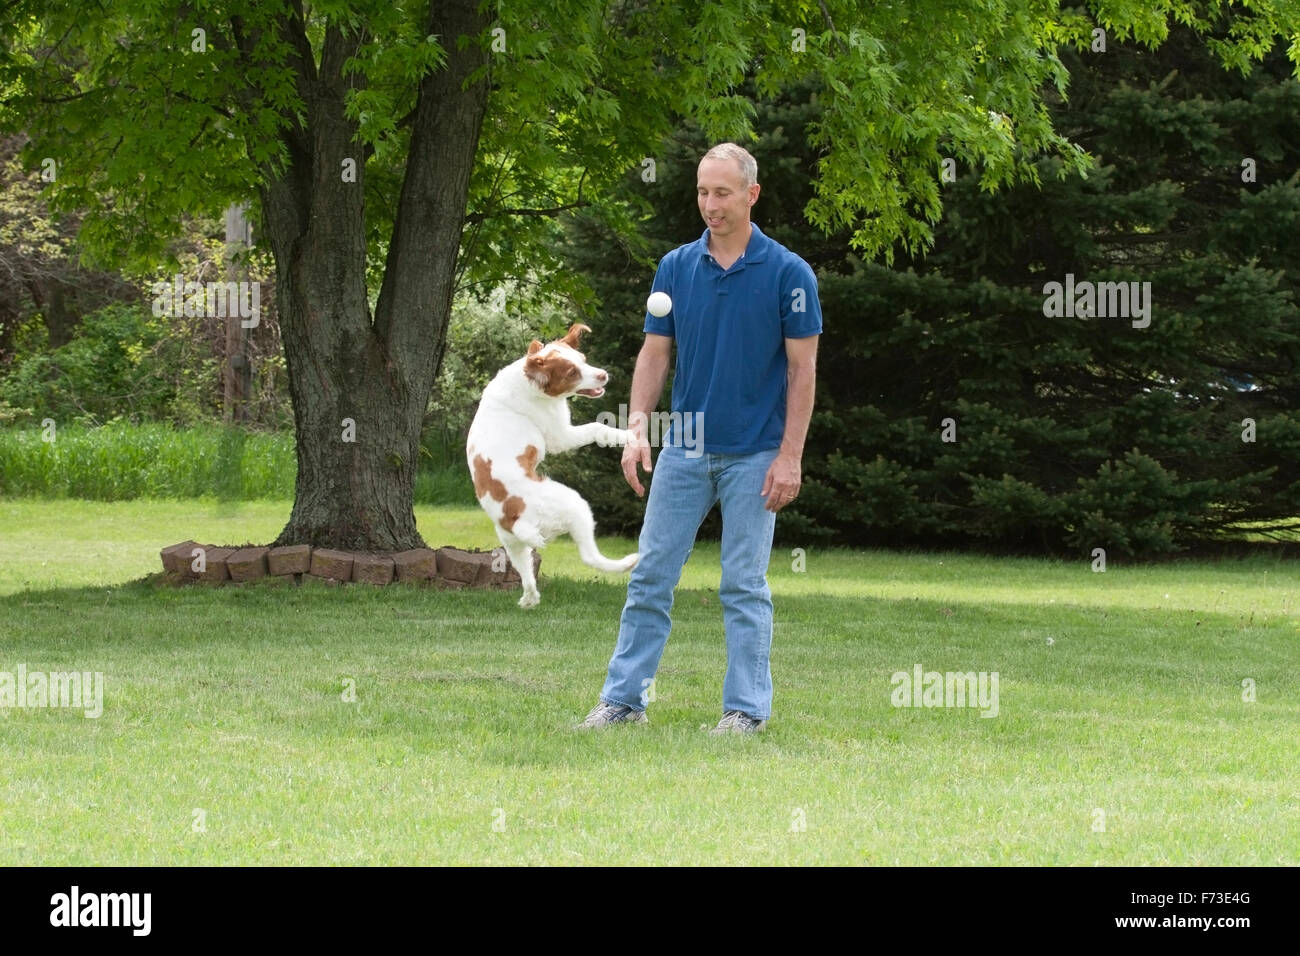 Dog leaps in air to catch ball after man tosses it for her Stock Photo